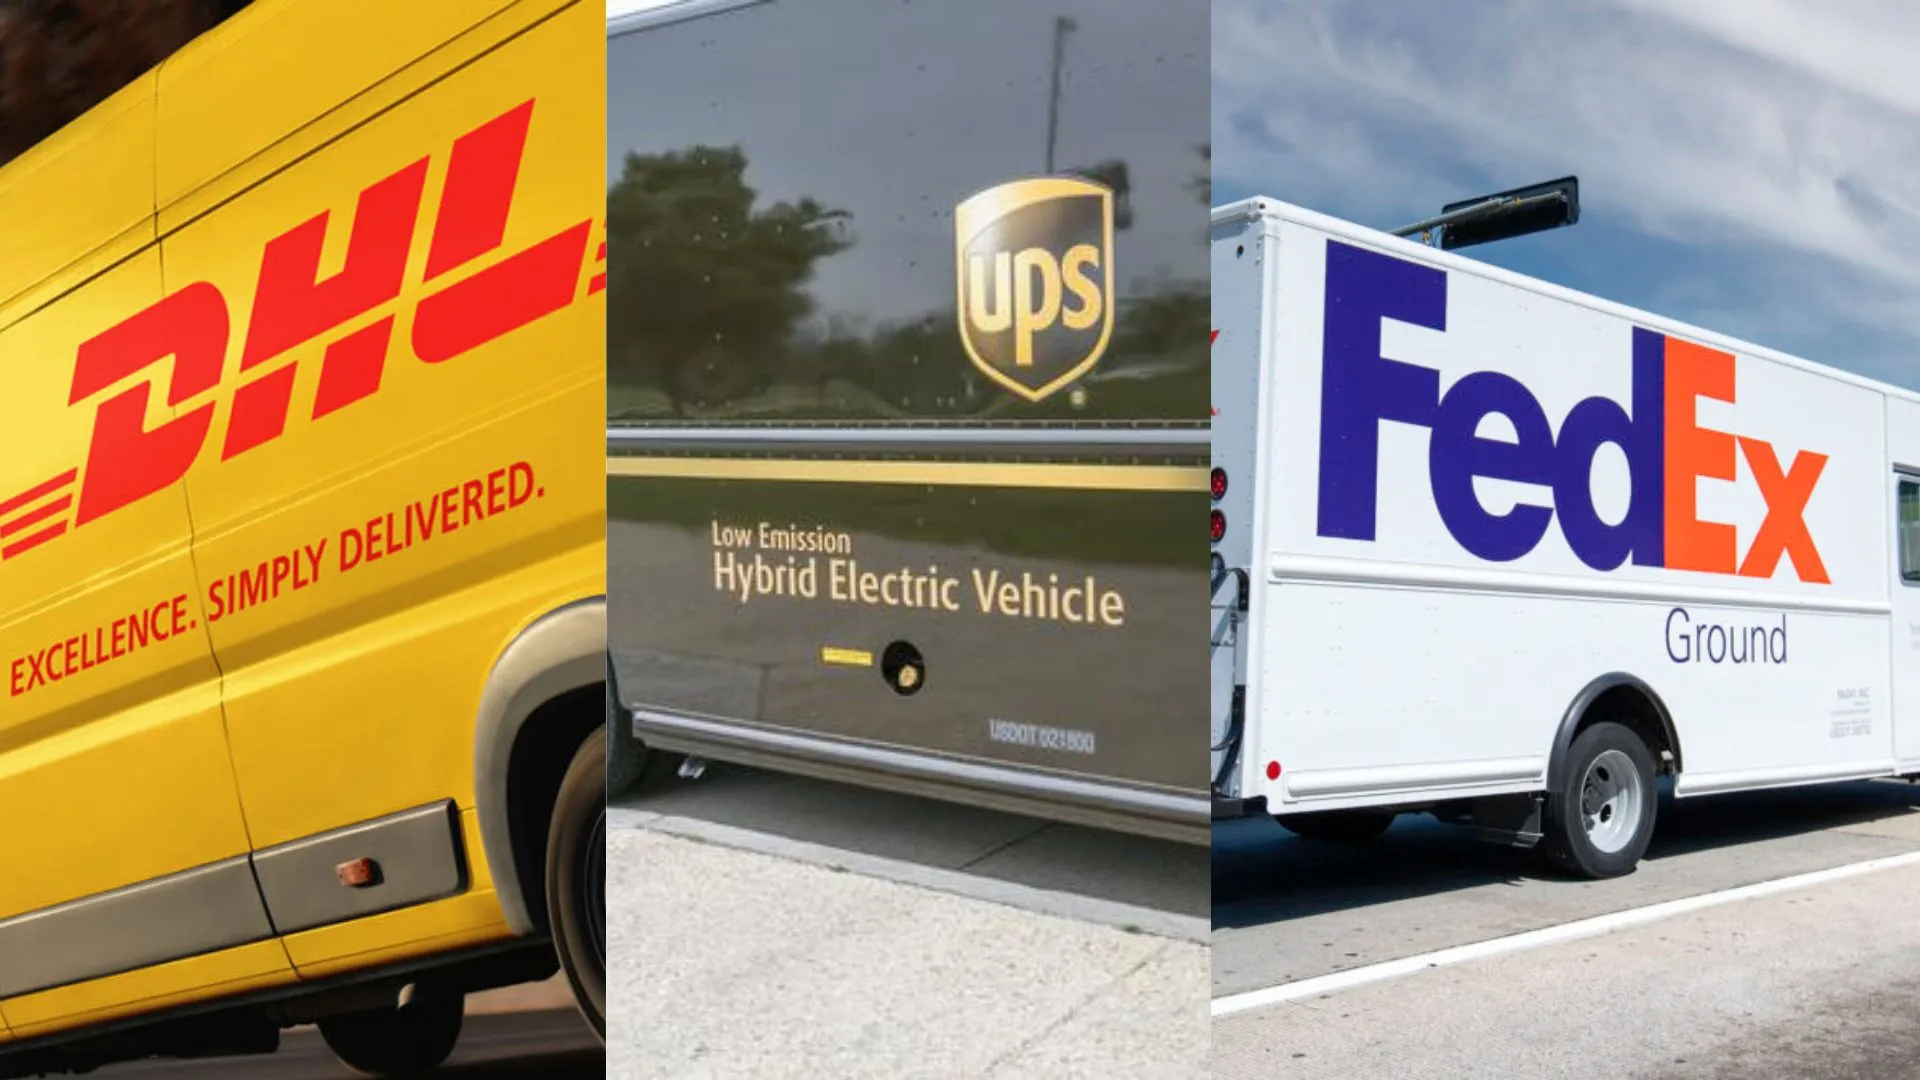 What's the Difference Between DHL UPS and FedEx?